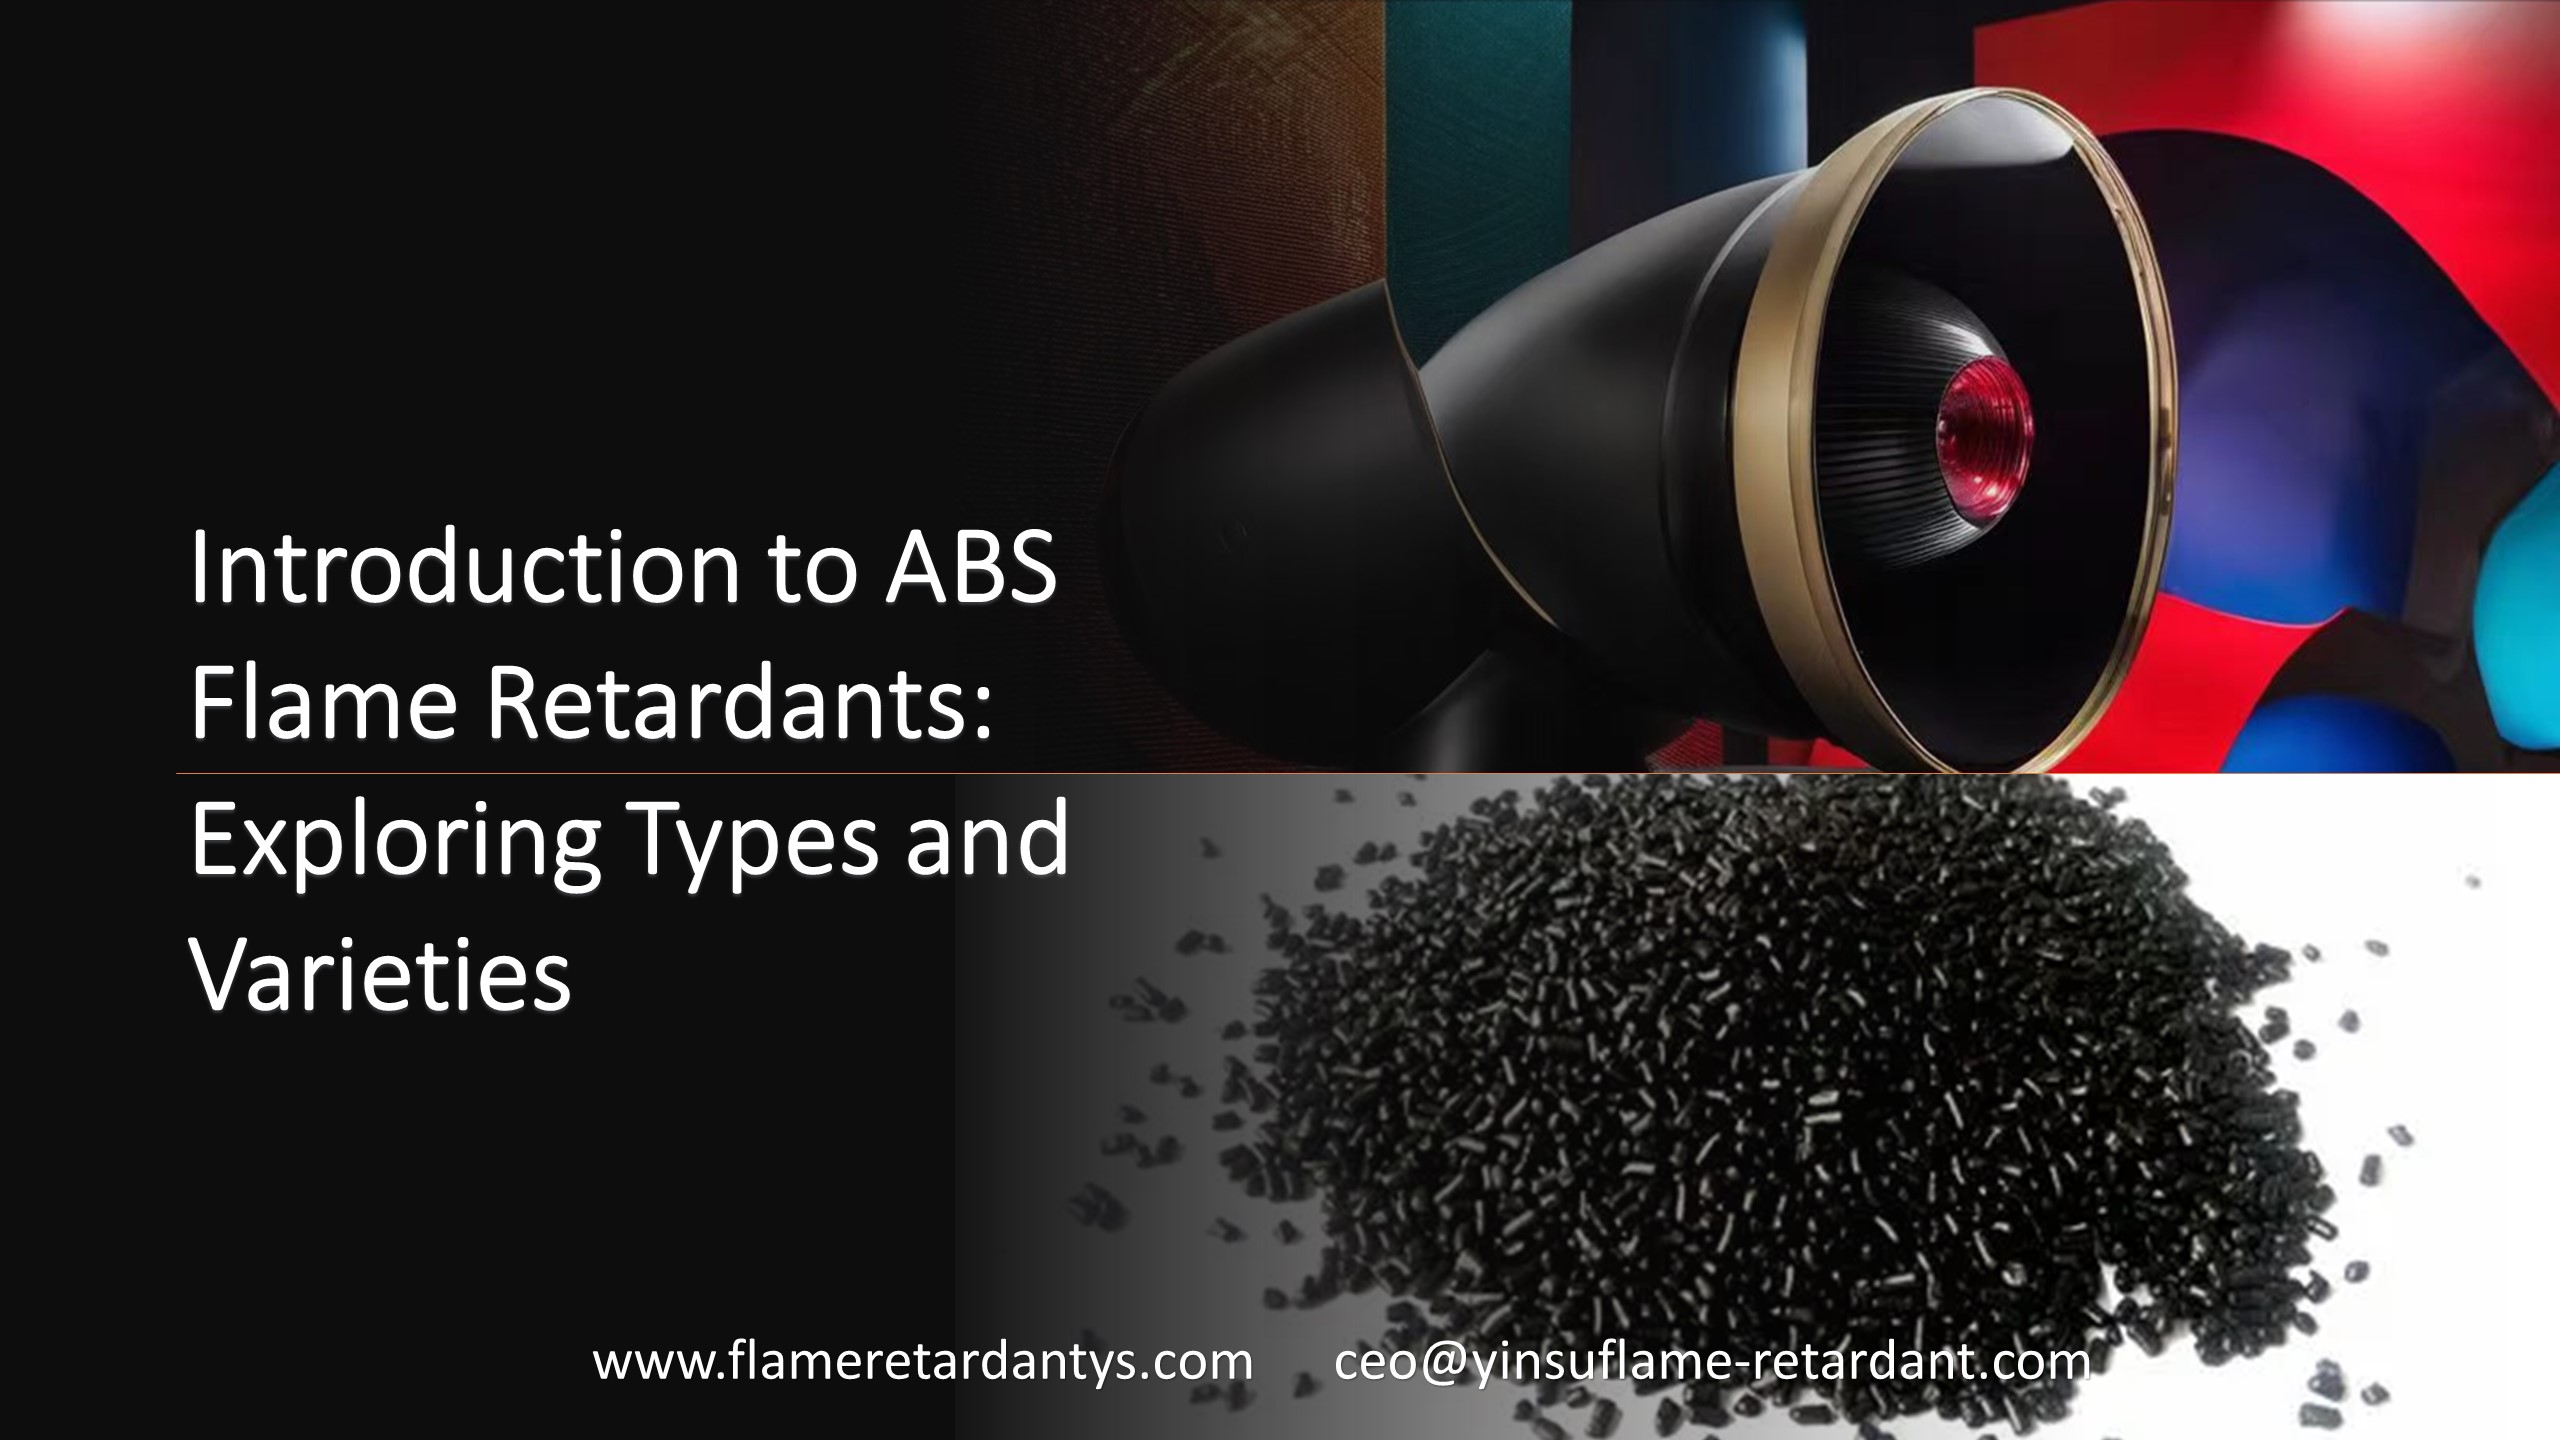 Introduction to ABS Flame Retardants Exploring Types and Varieties